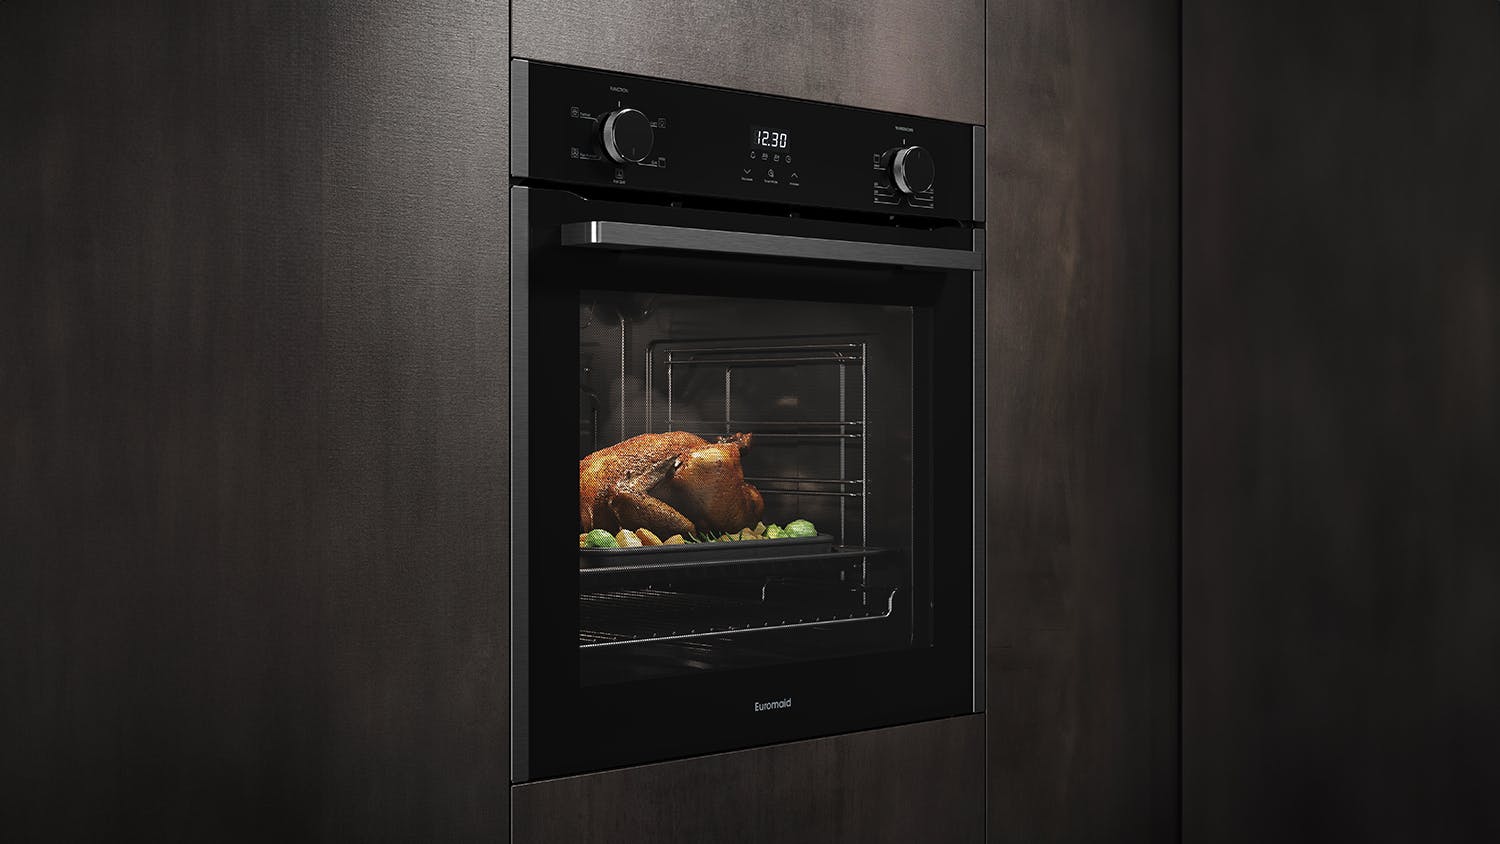 Euromaid 60cm 5 Function Built-In Oven - Dark Stainless Steel (EO605DTB)